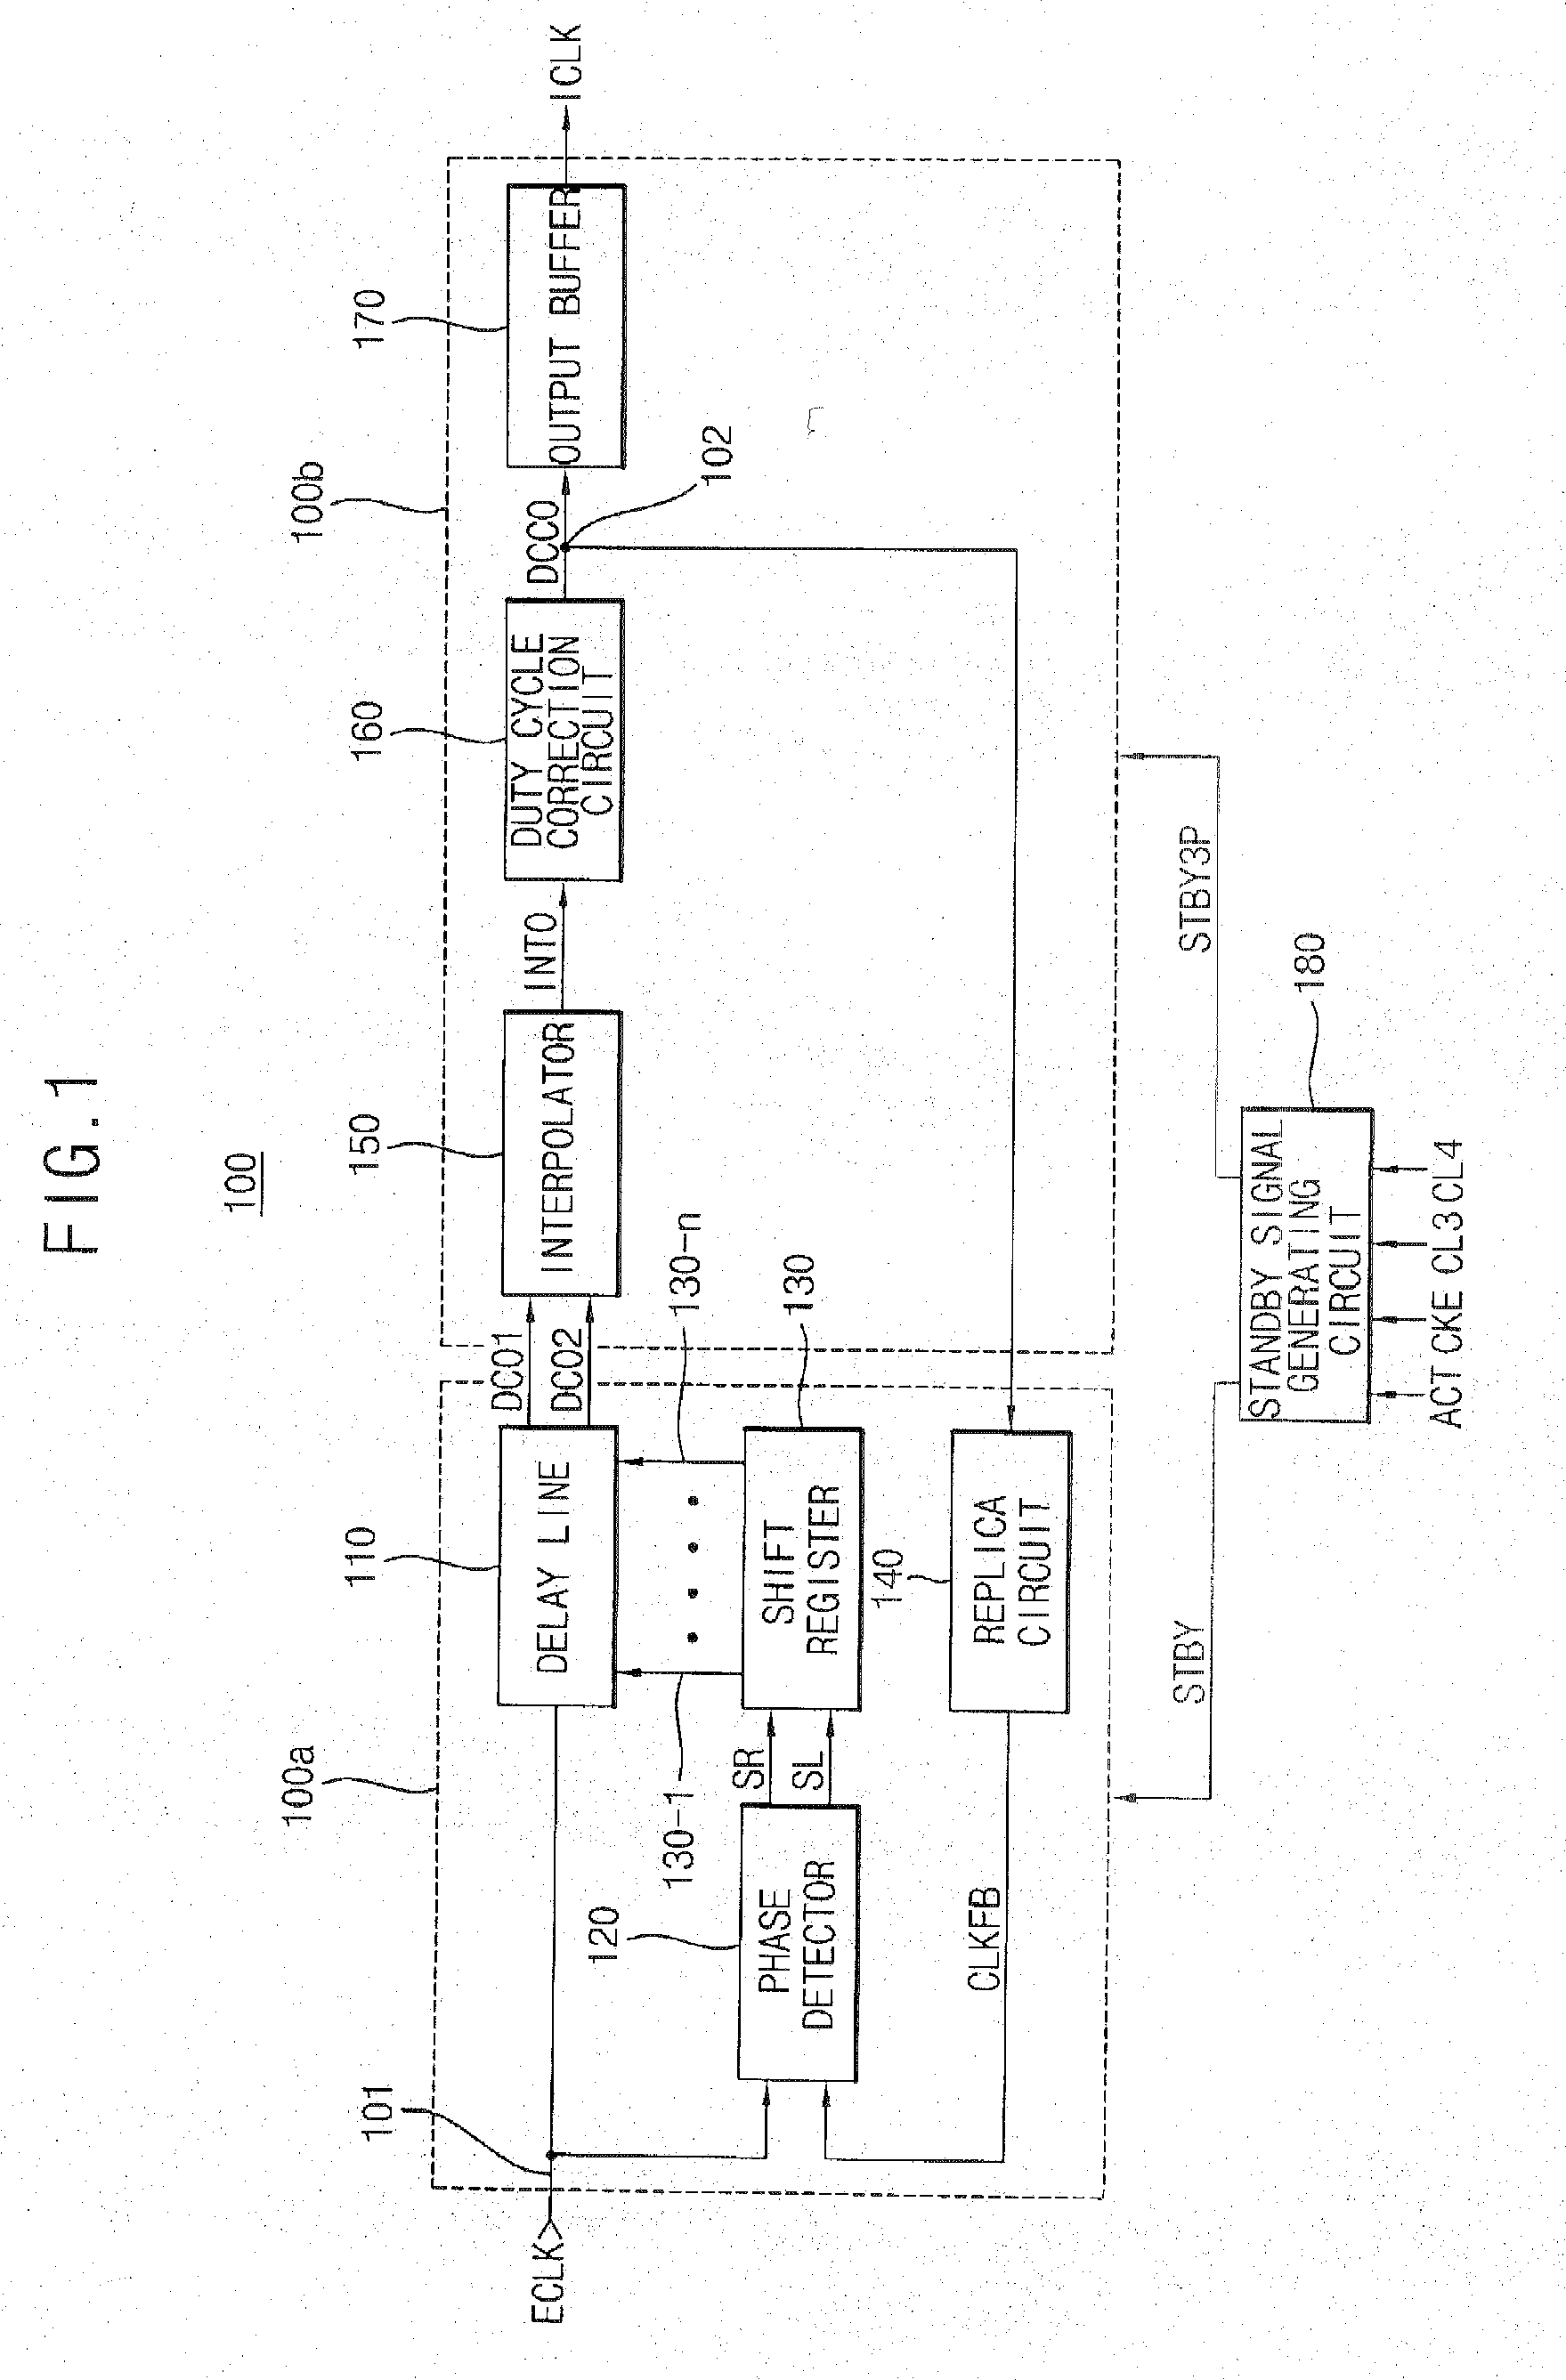 Delay-locked loop circuit of a semiconductor device and method of controlling the same